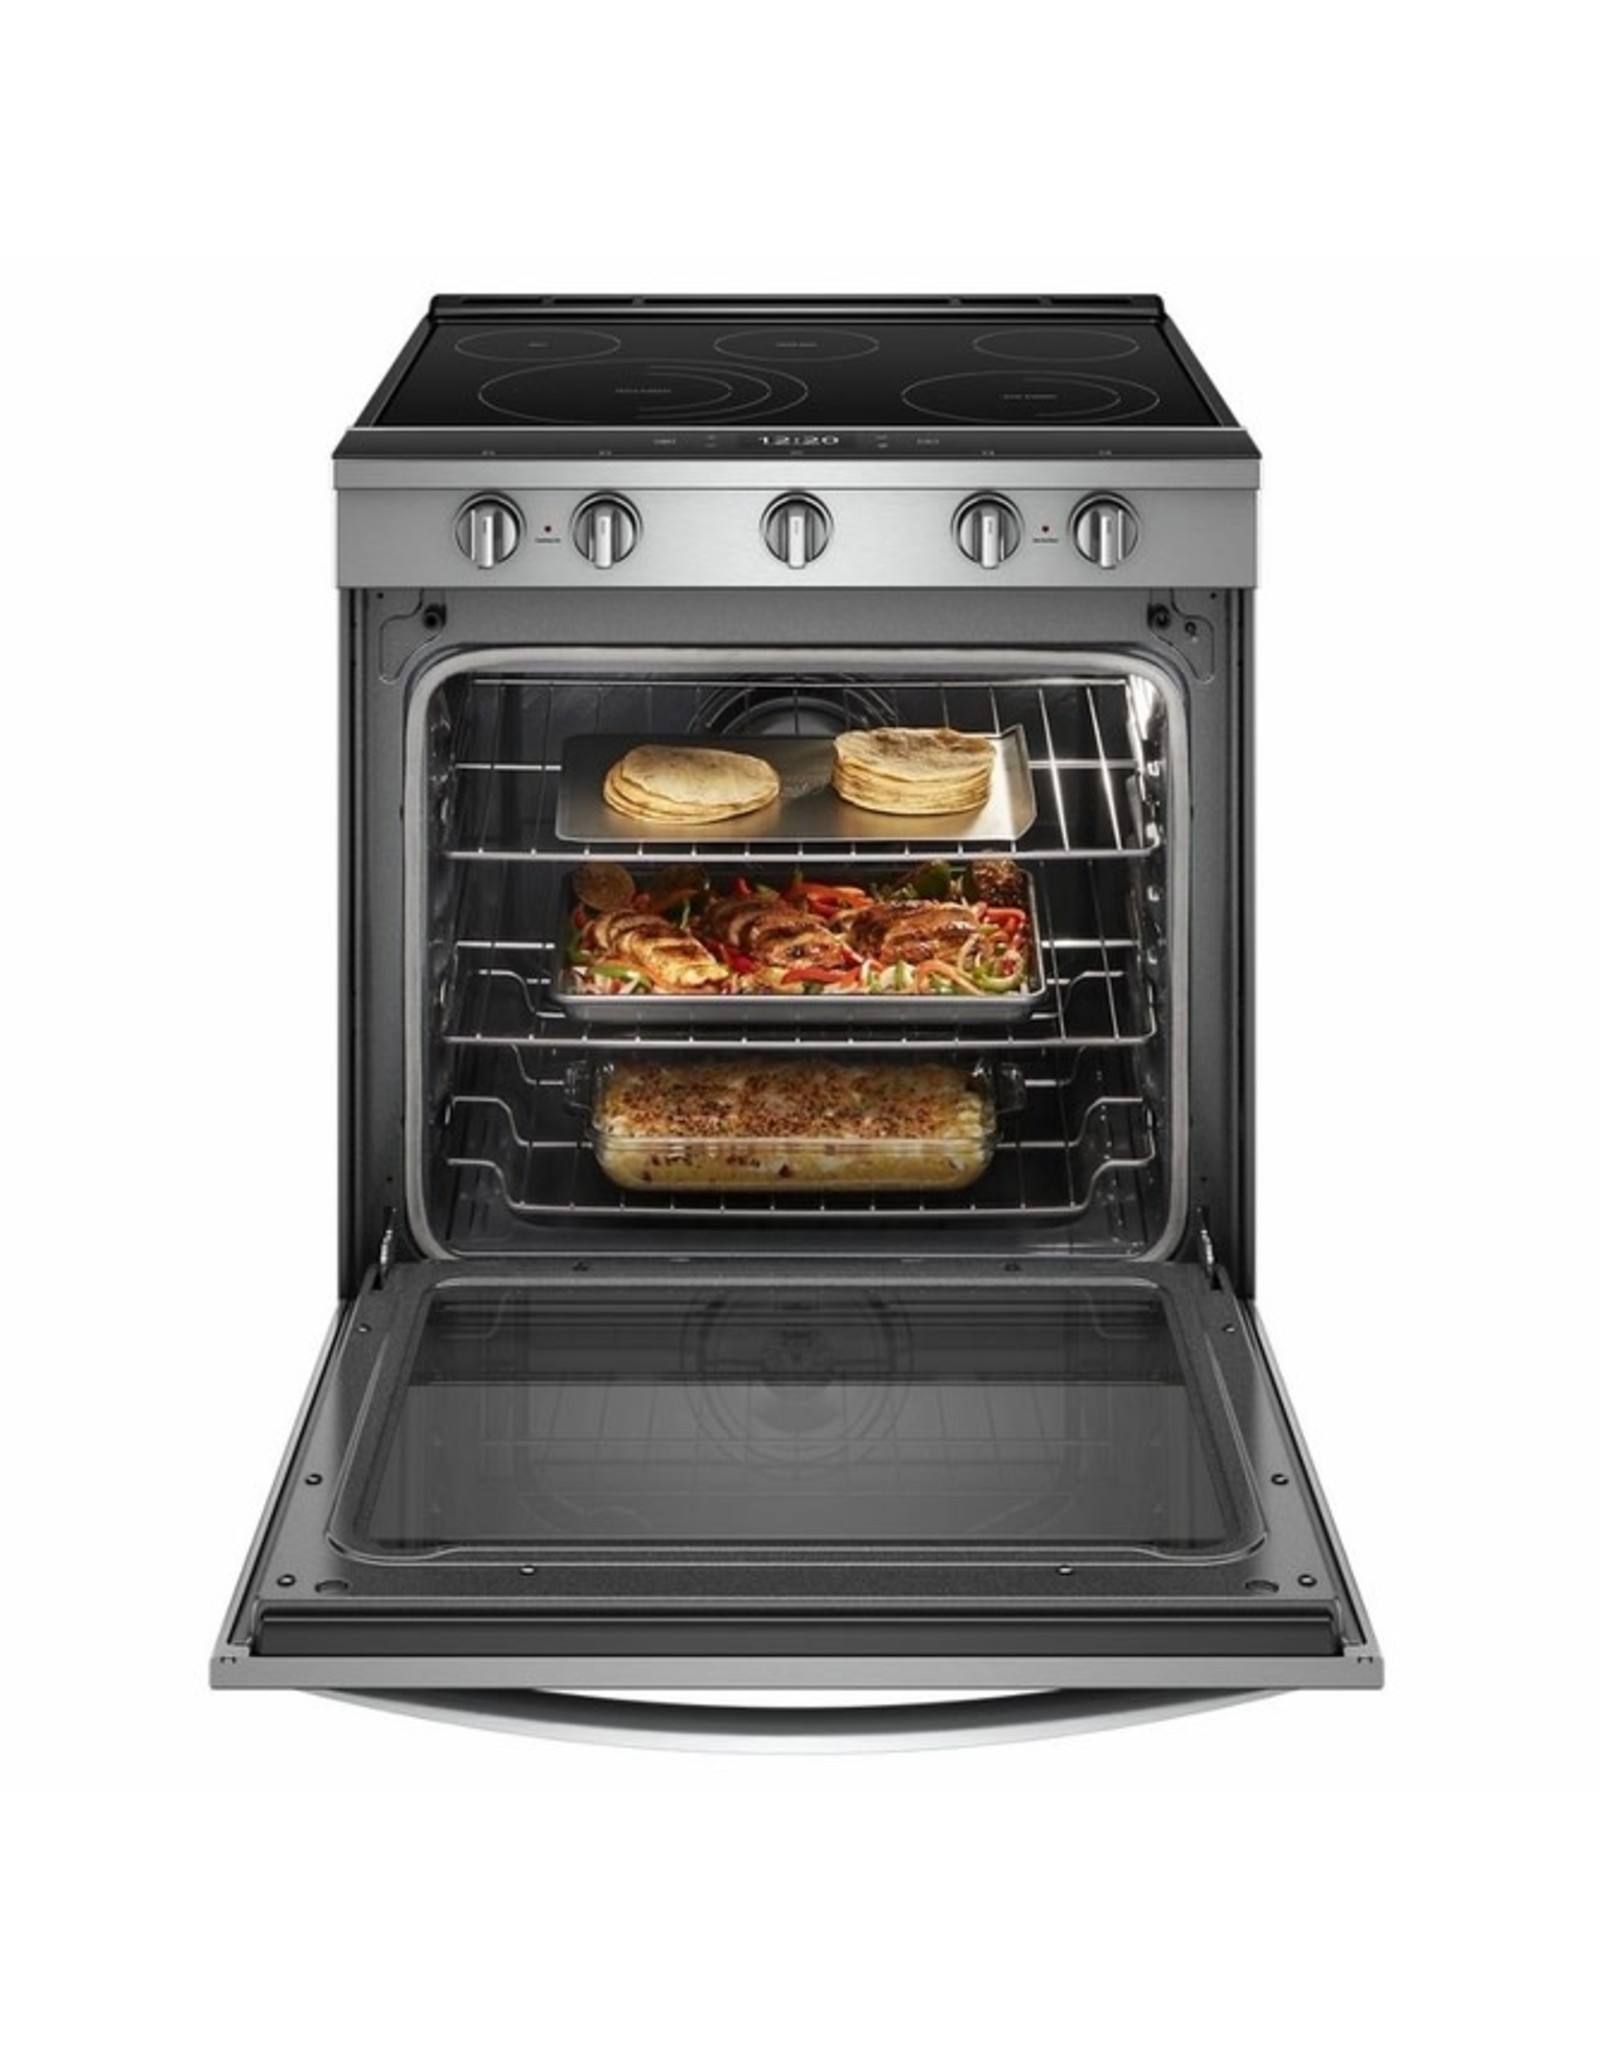 WHIRLPOOL WEE750H0HZ 6.4 cu. ft. Smart Slide-In Electric Range with Scan-to-Cook Technology in Fingerprint Resistant Stainless Steel